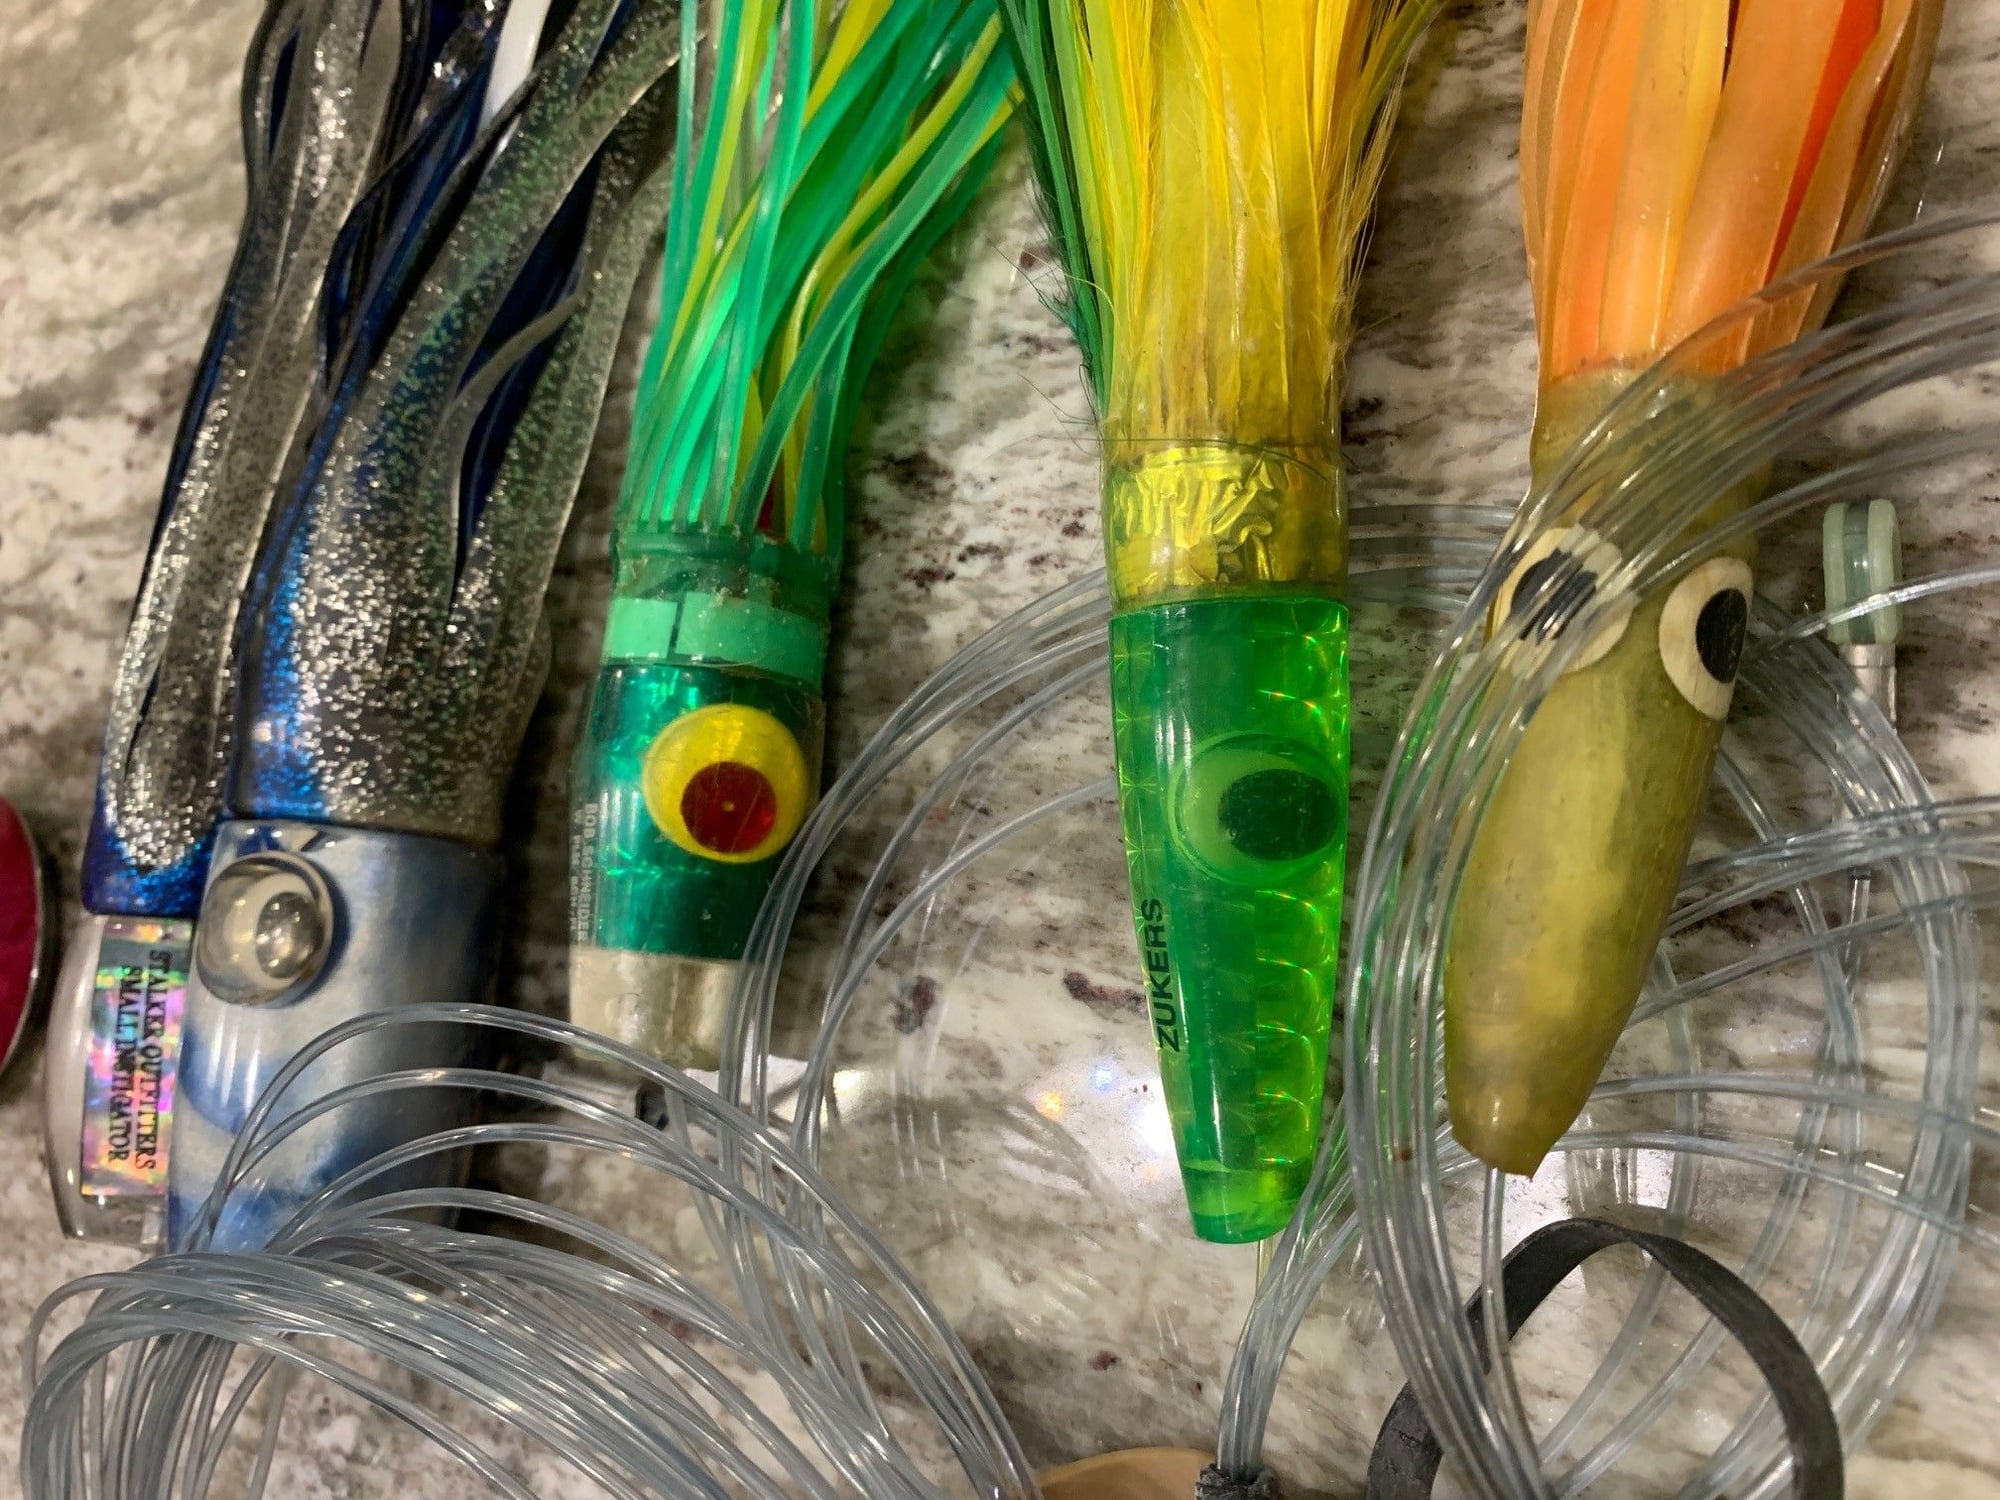 Custom marlin and wahoo rigs - The Hull Truth - Boating and Fishing Forum